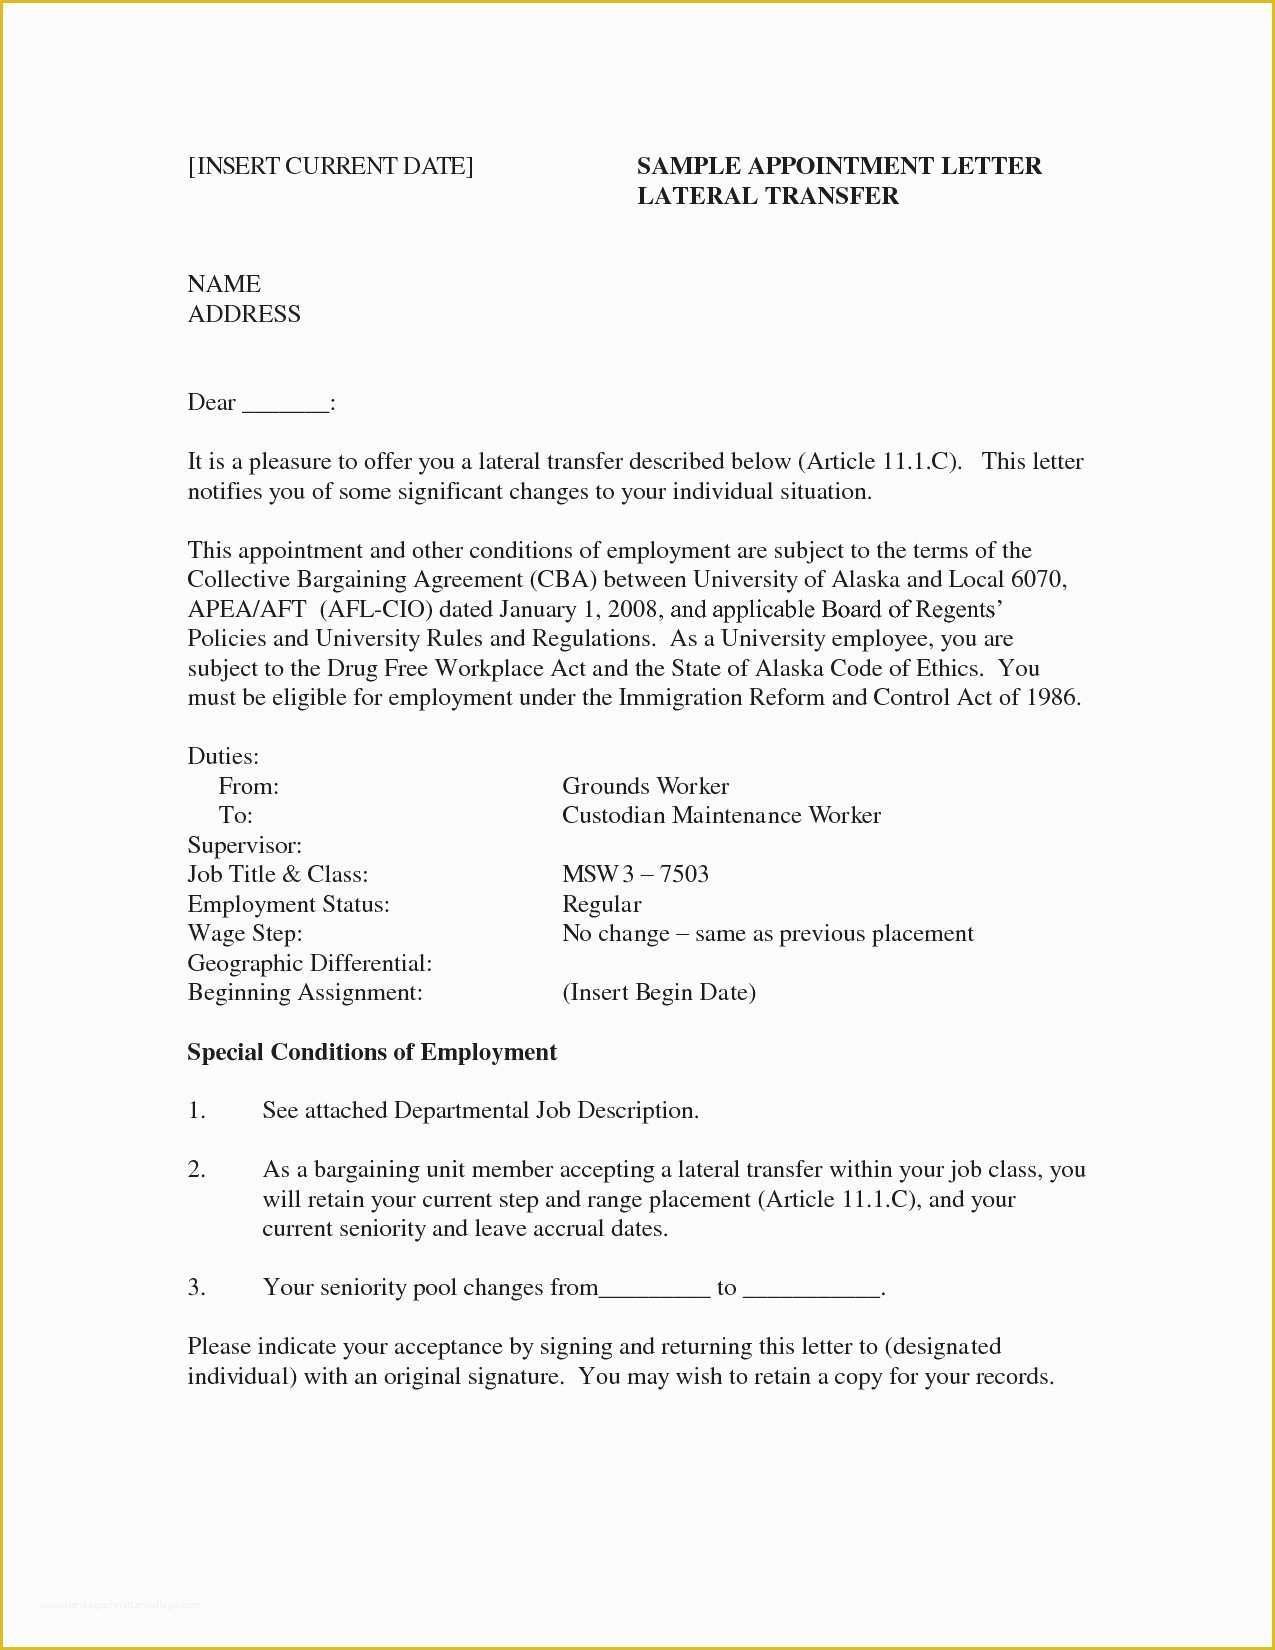 Free foreclosure Letter Template Of Free foreclosure Letter Template Examples